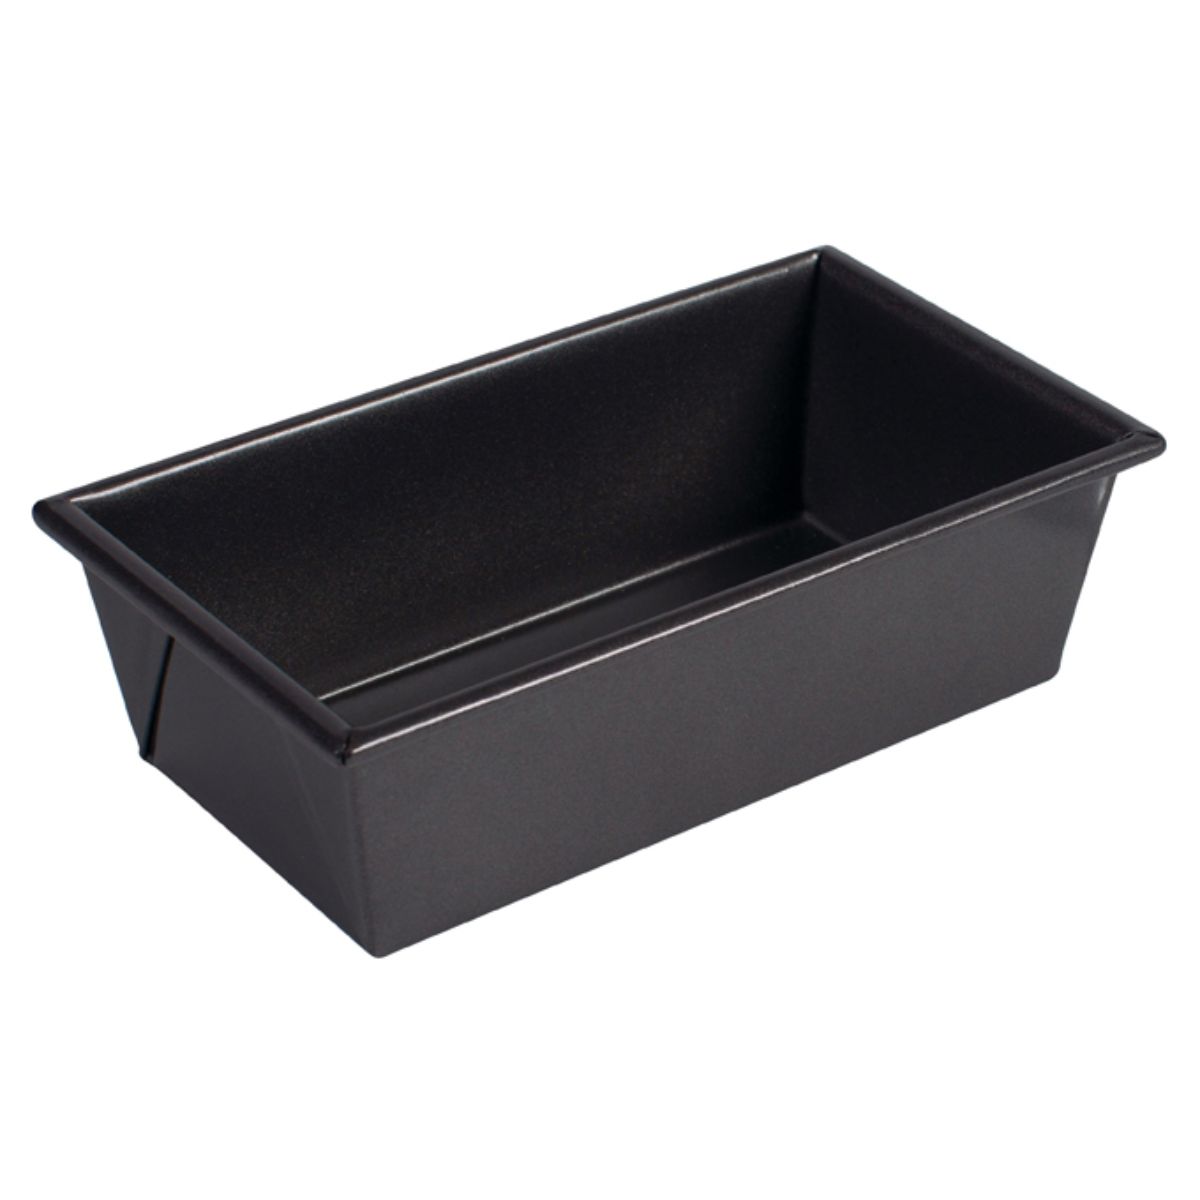 Winco 5 Loaf Silicone Bread Baking Pan Black - Office Depot